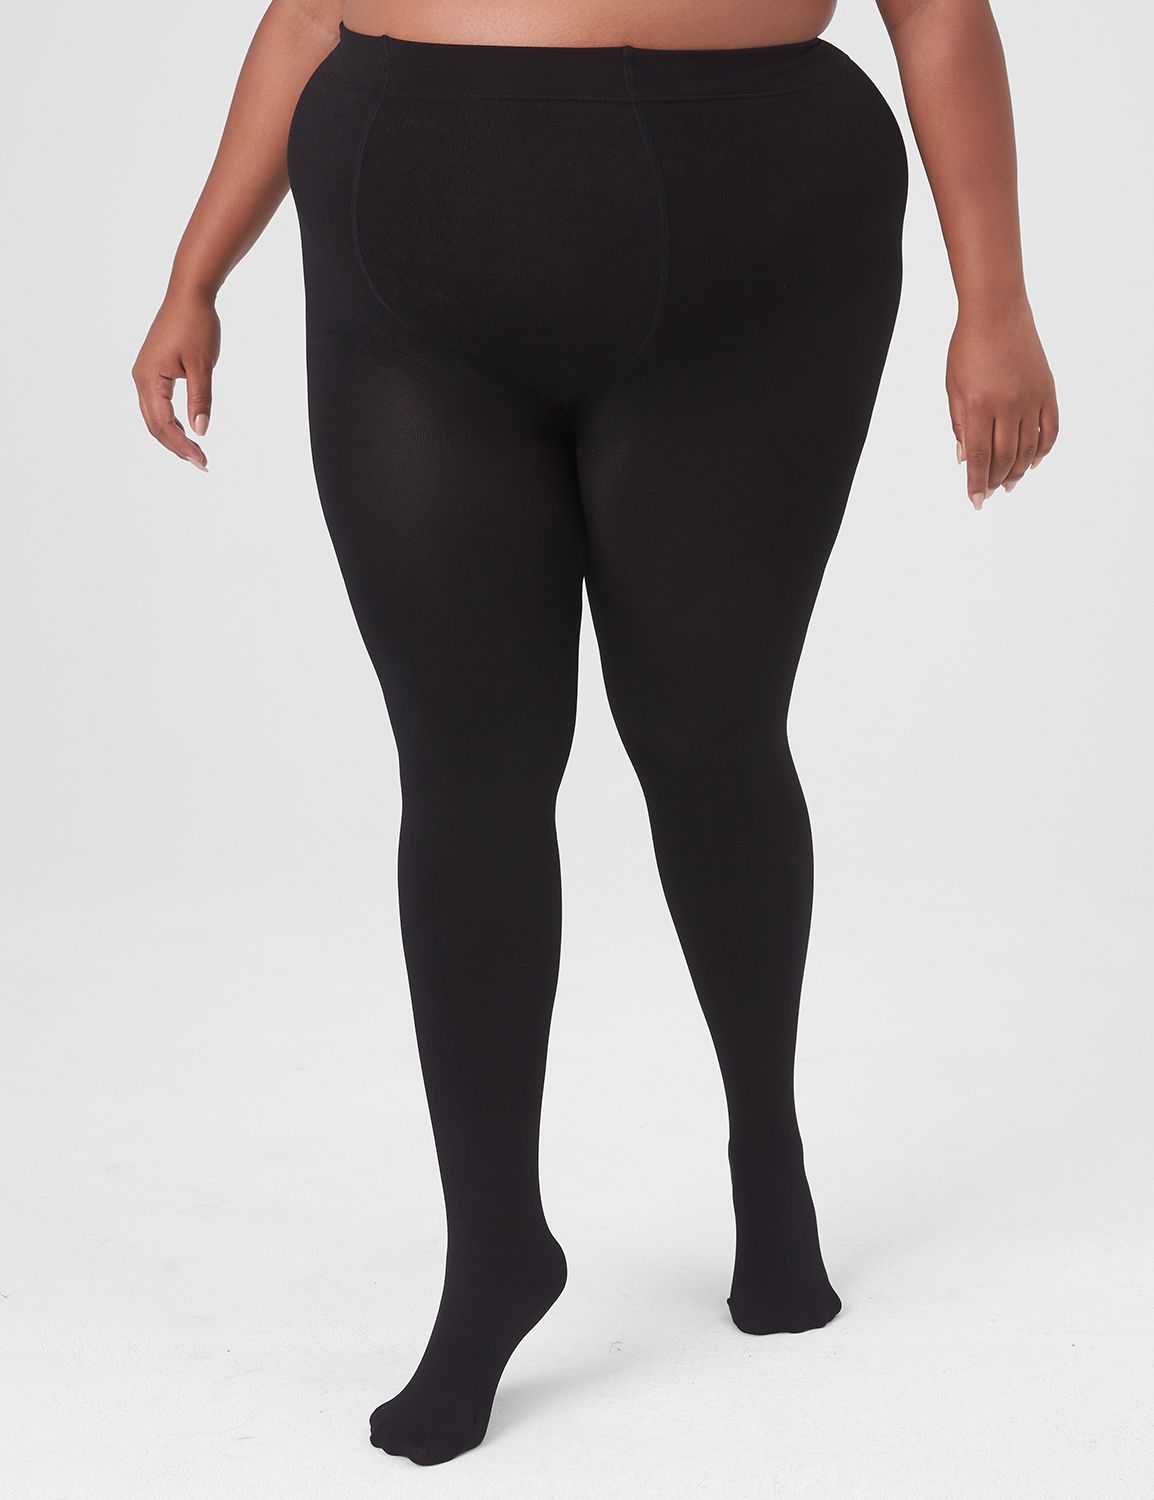 Women's Plus Size Solid Color Seamless Fleece Lined Leggings. - Fleece  Lined - 2 Elastic Waistband - Full-Length - One size fits most 16-22 -  Inseam Approximately 26 L - 92% Nylon / 8% Spandex, 7316610